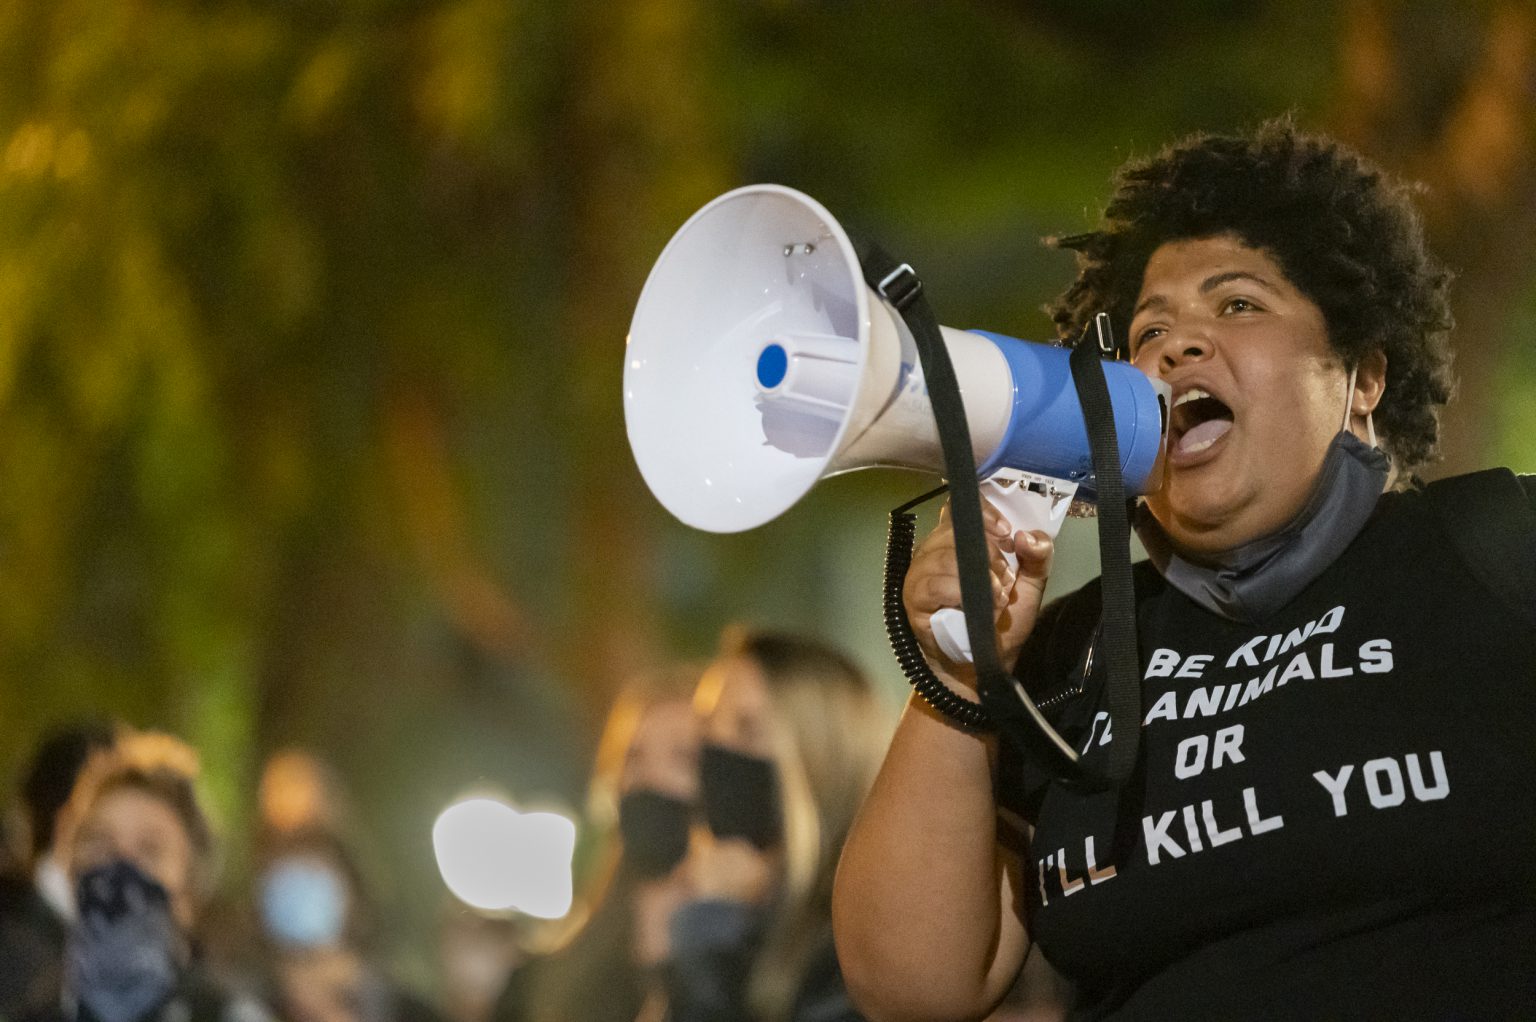 This image from July 17 shows the woman who appears to be the militant protester who said, 'I am not sad that a fucking fascist died tonight.' Photo by Ethan E. RockeCoffee or Die Magazine.